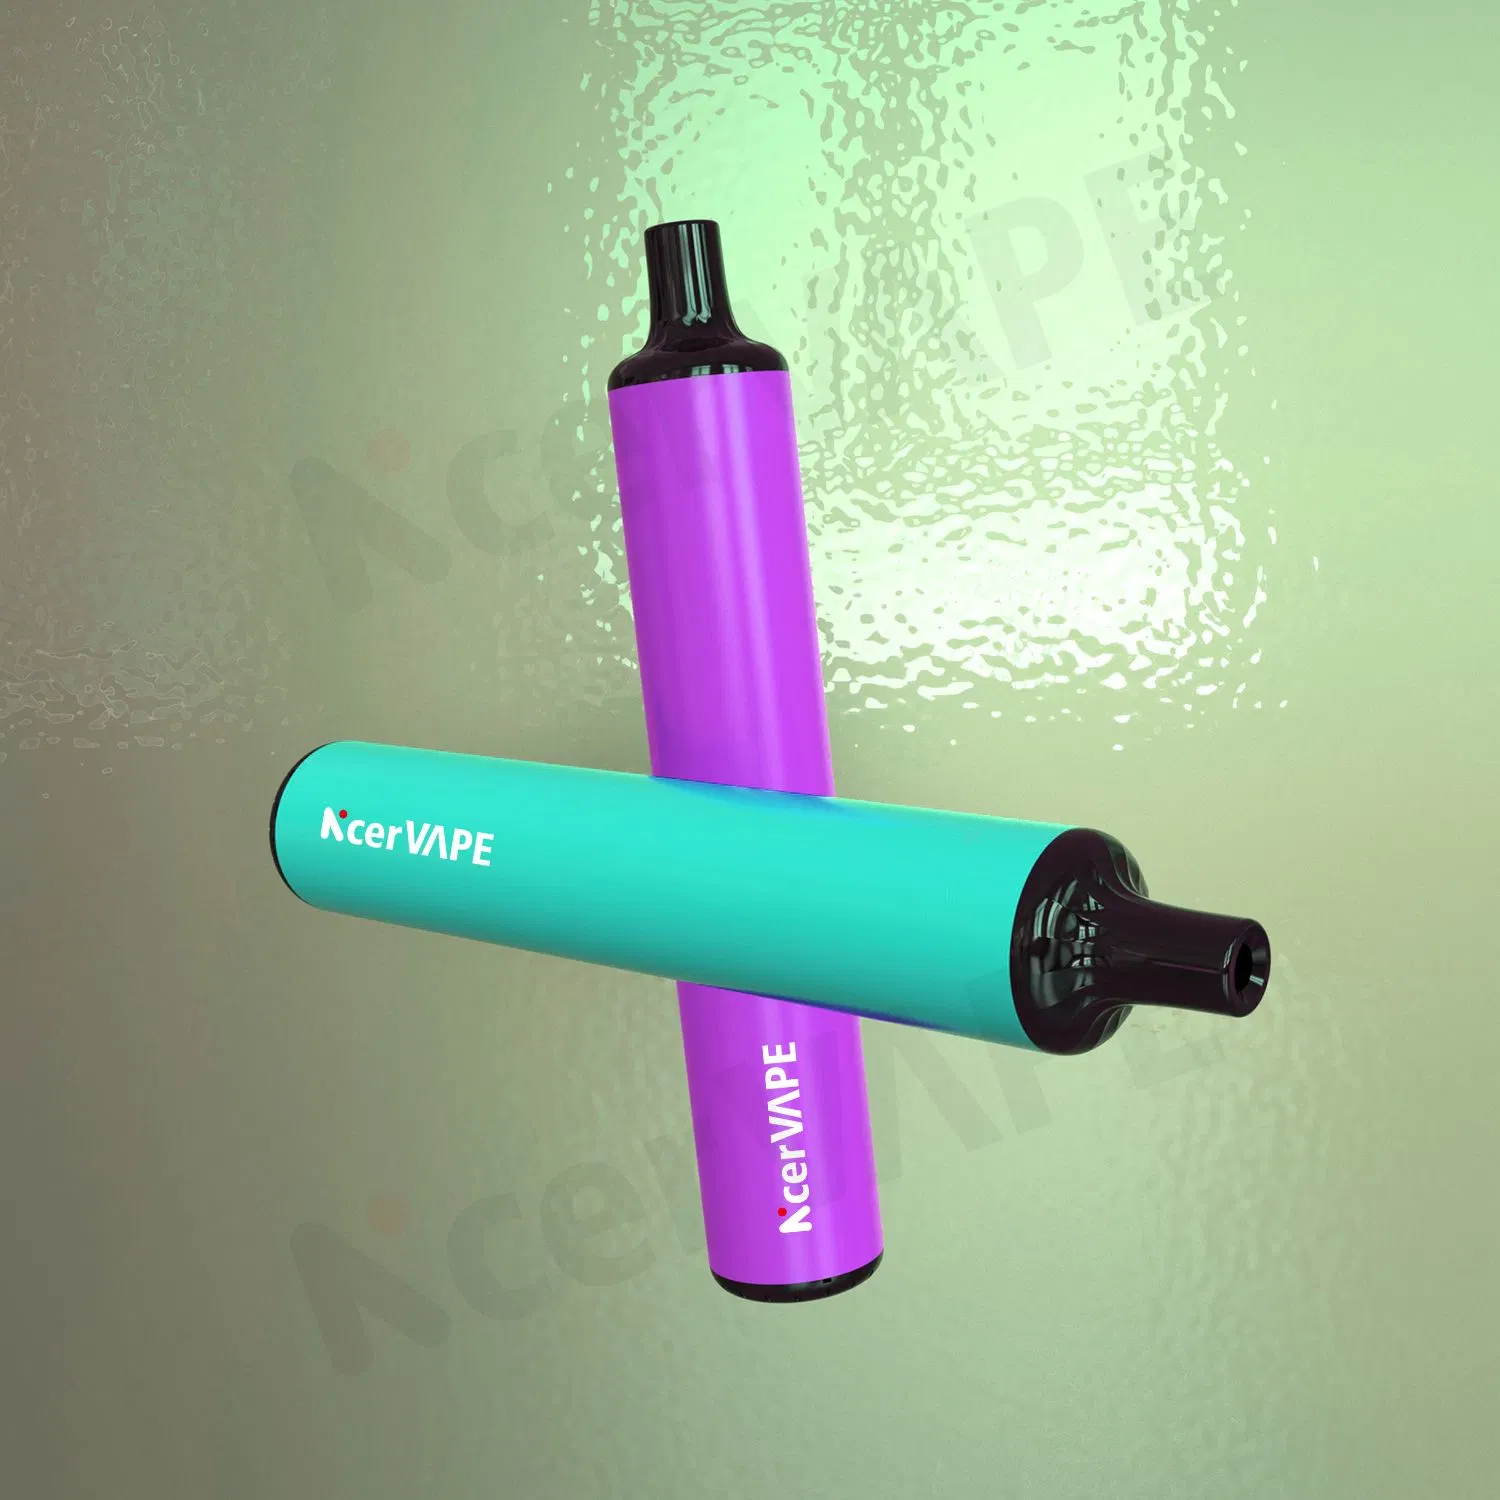 2023 New Style Nicervape 2000 Puffs Hot Salt Fast Delivery Disposable Electronic Cigarette